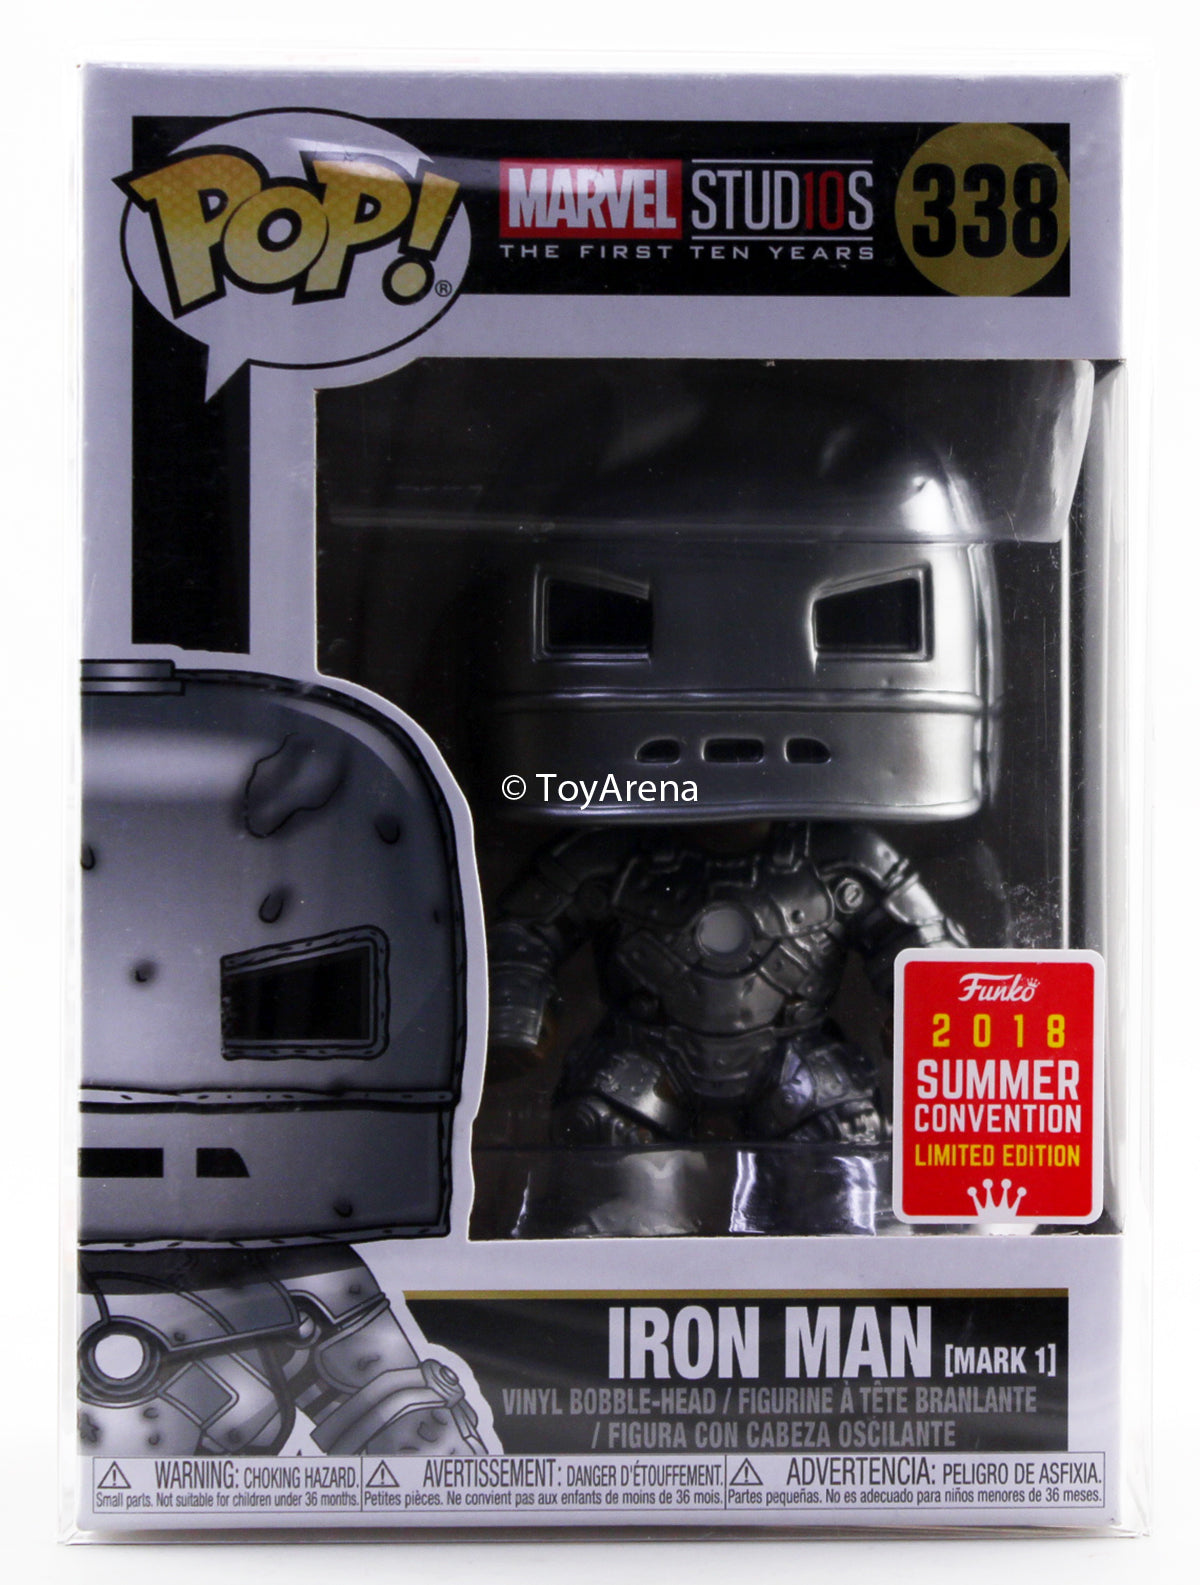 Funko Pop Iron Man Mark 1 10th Anniversary SDCC 2018 Exclusive with Sleve Case